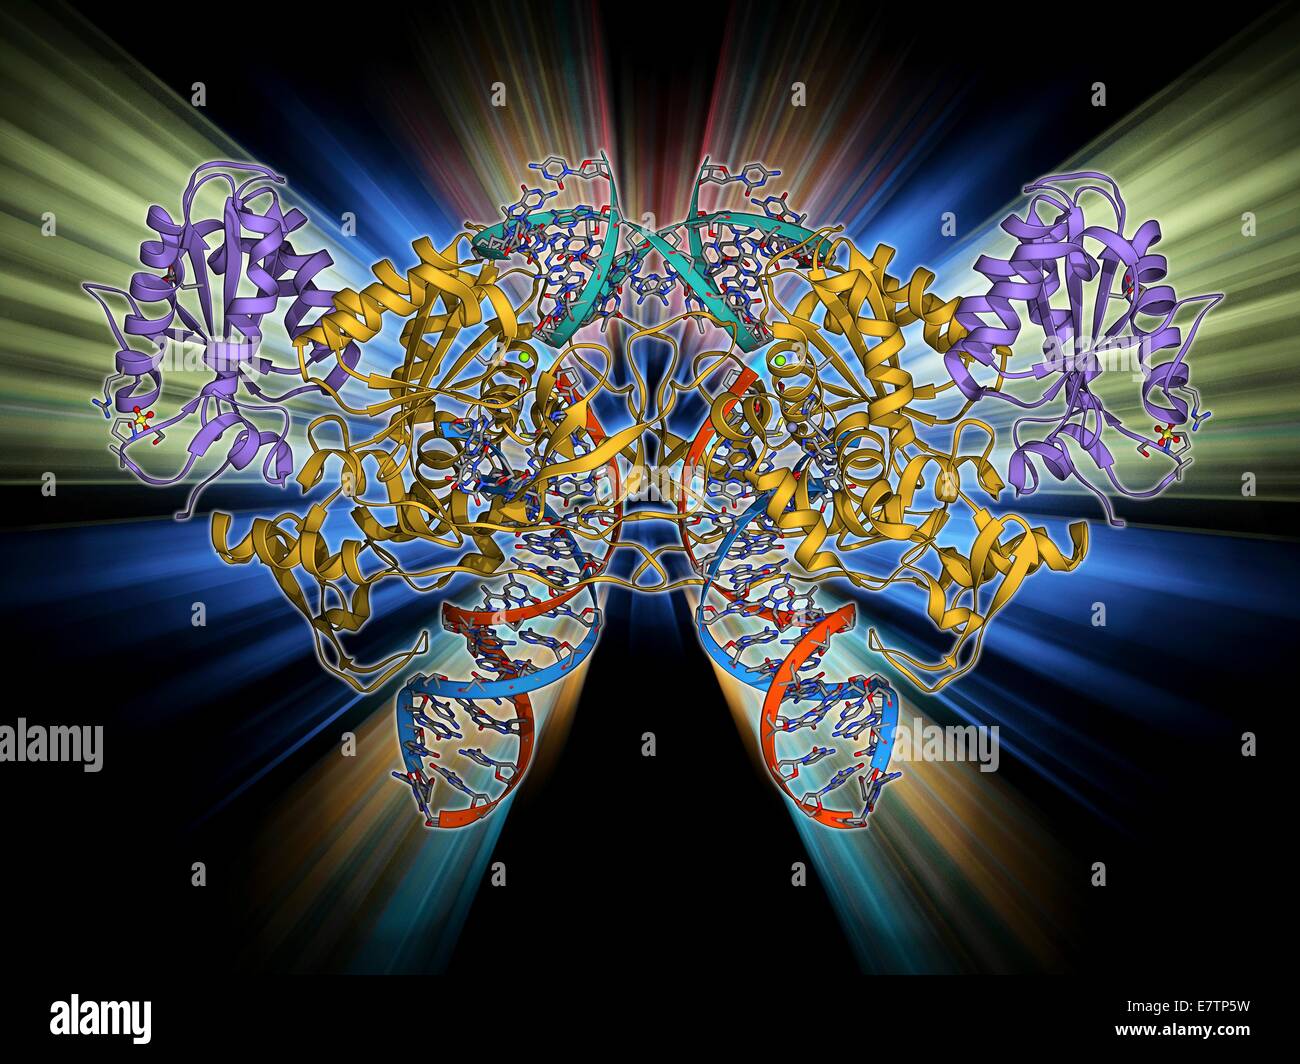 Retroviral intasome molecule. Molecular model of an intasome from a retrovirus complexed with host cell DNA (deoxyribonucleic acid). Intasomes are nucleoprotein complexes of the enzyme integrase and viral DNA. Integrase is used to integrate the viral DNA Stock Photo